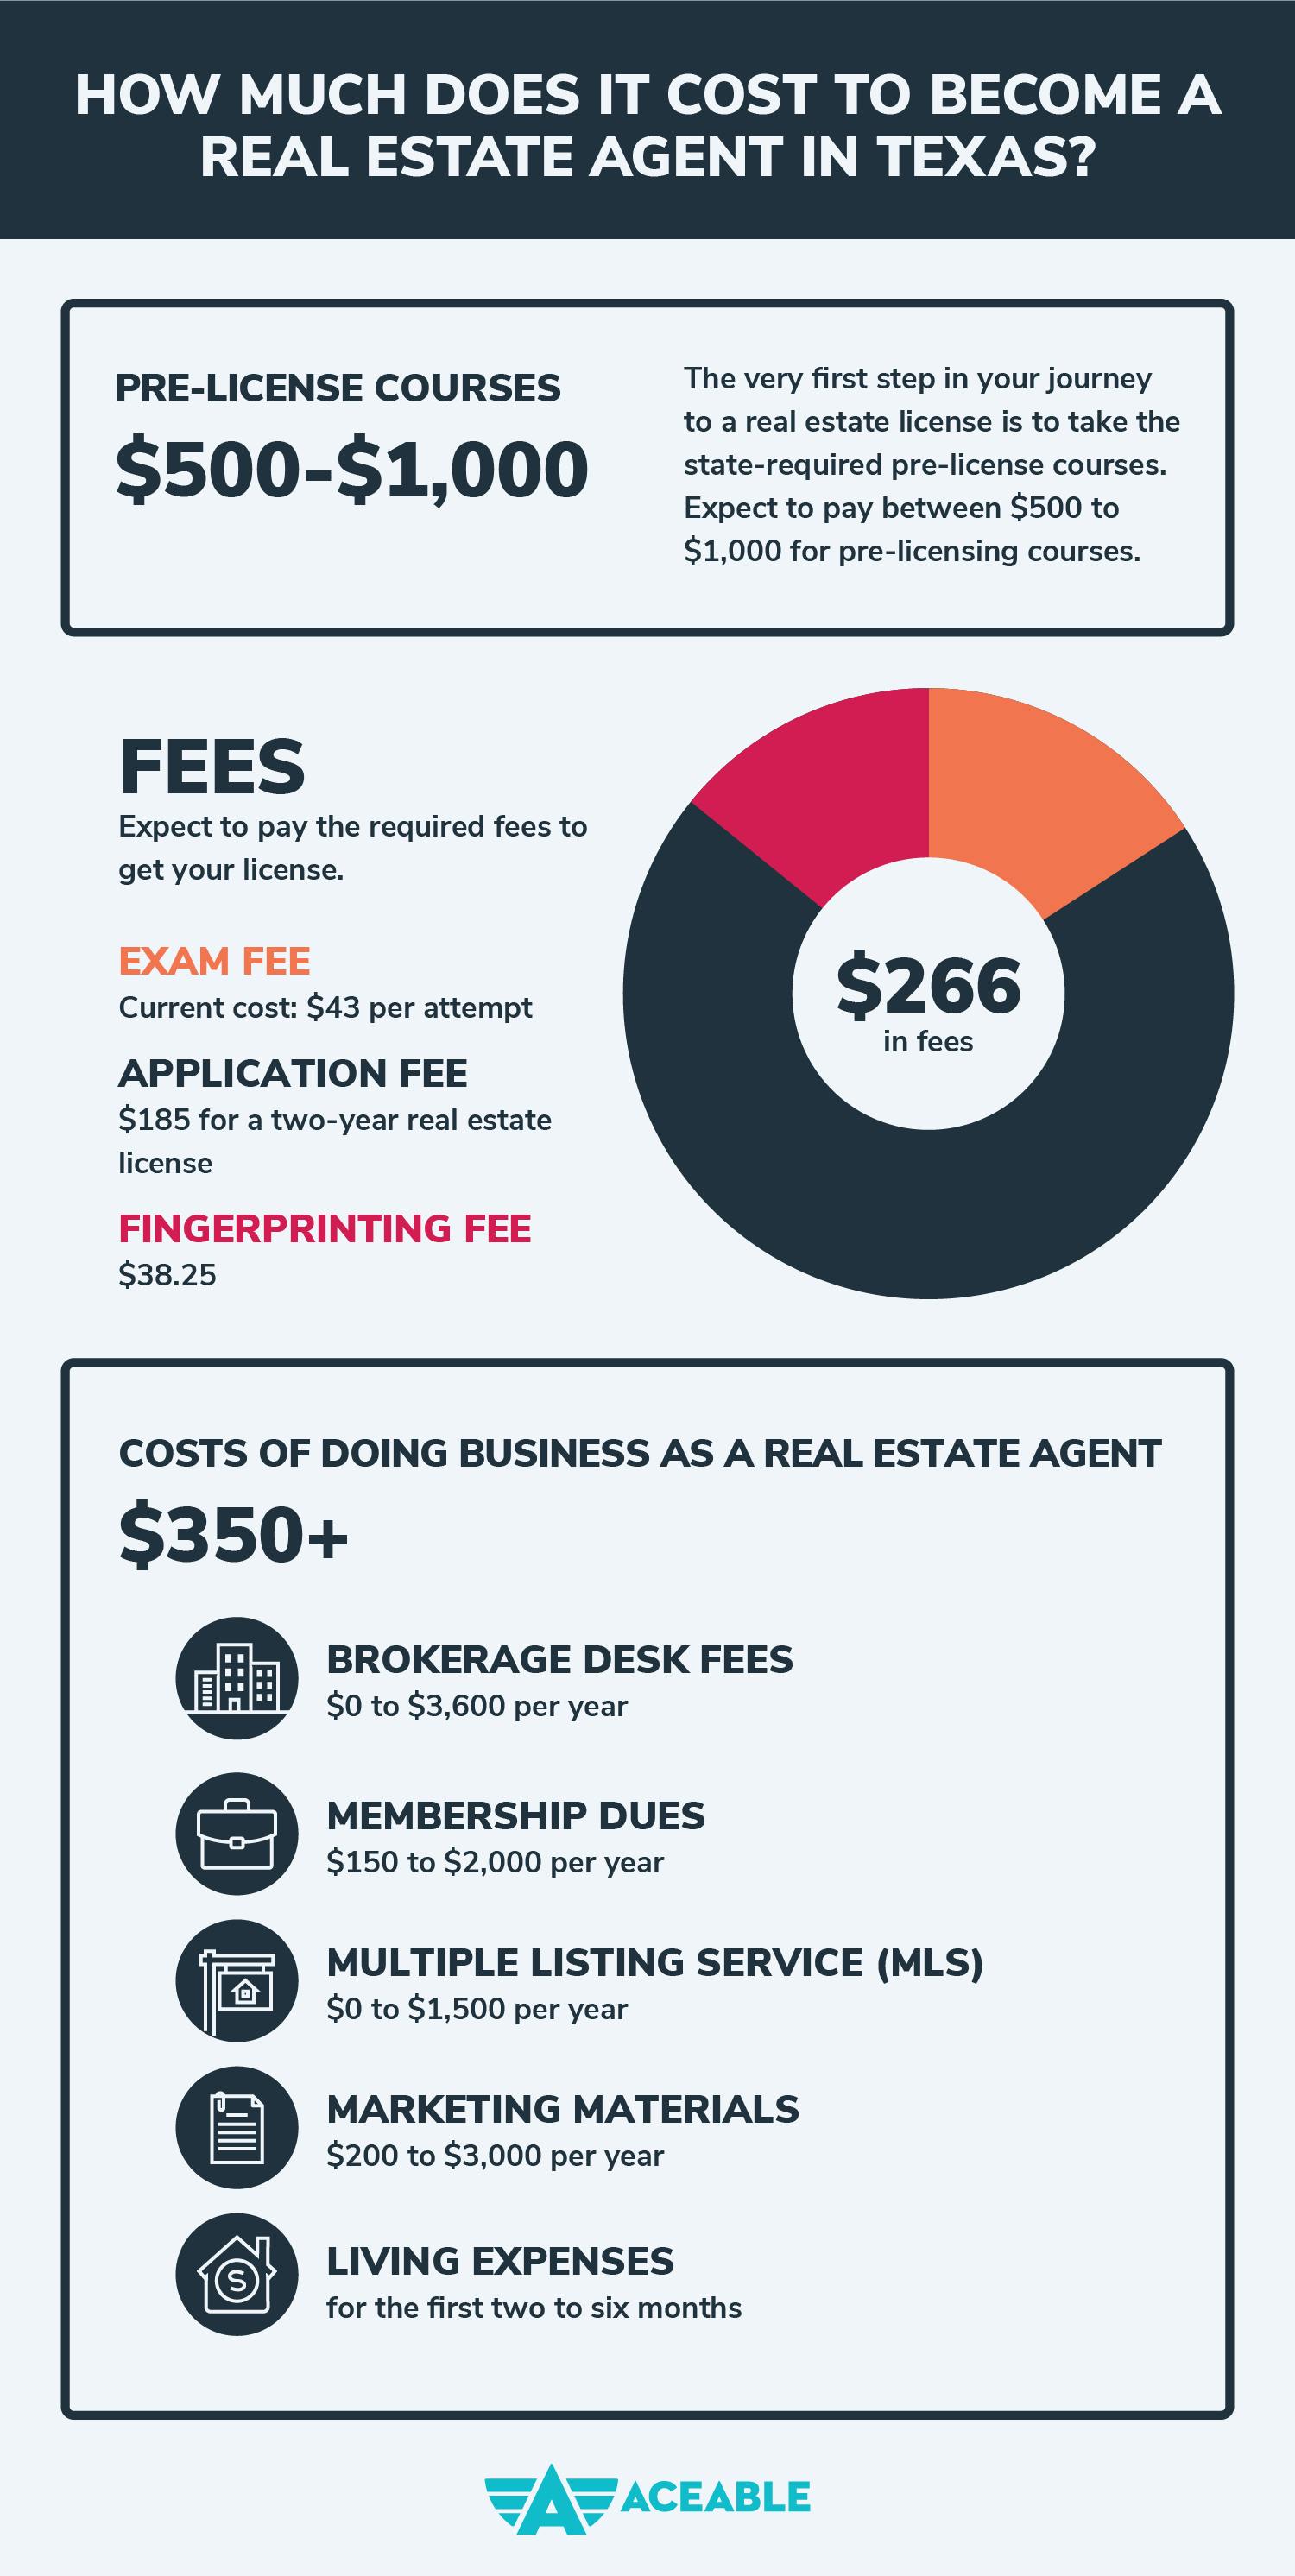 How much does it cost to become a real estate agent in Texas?